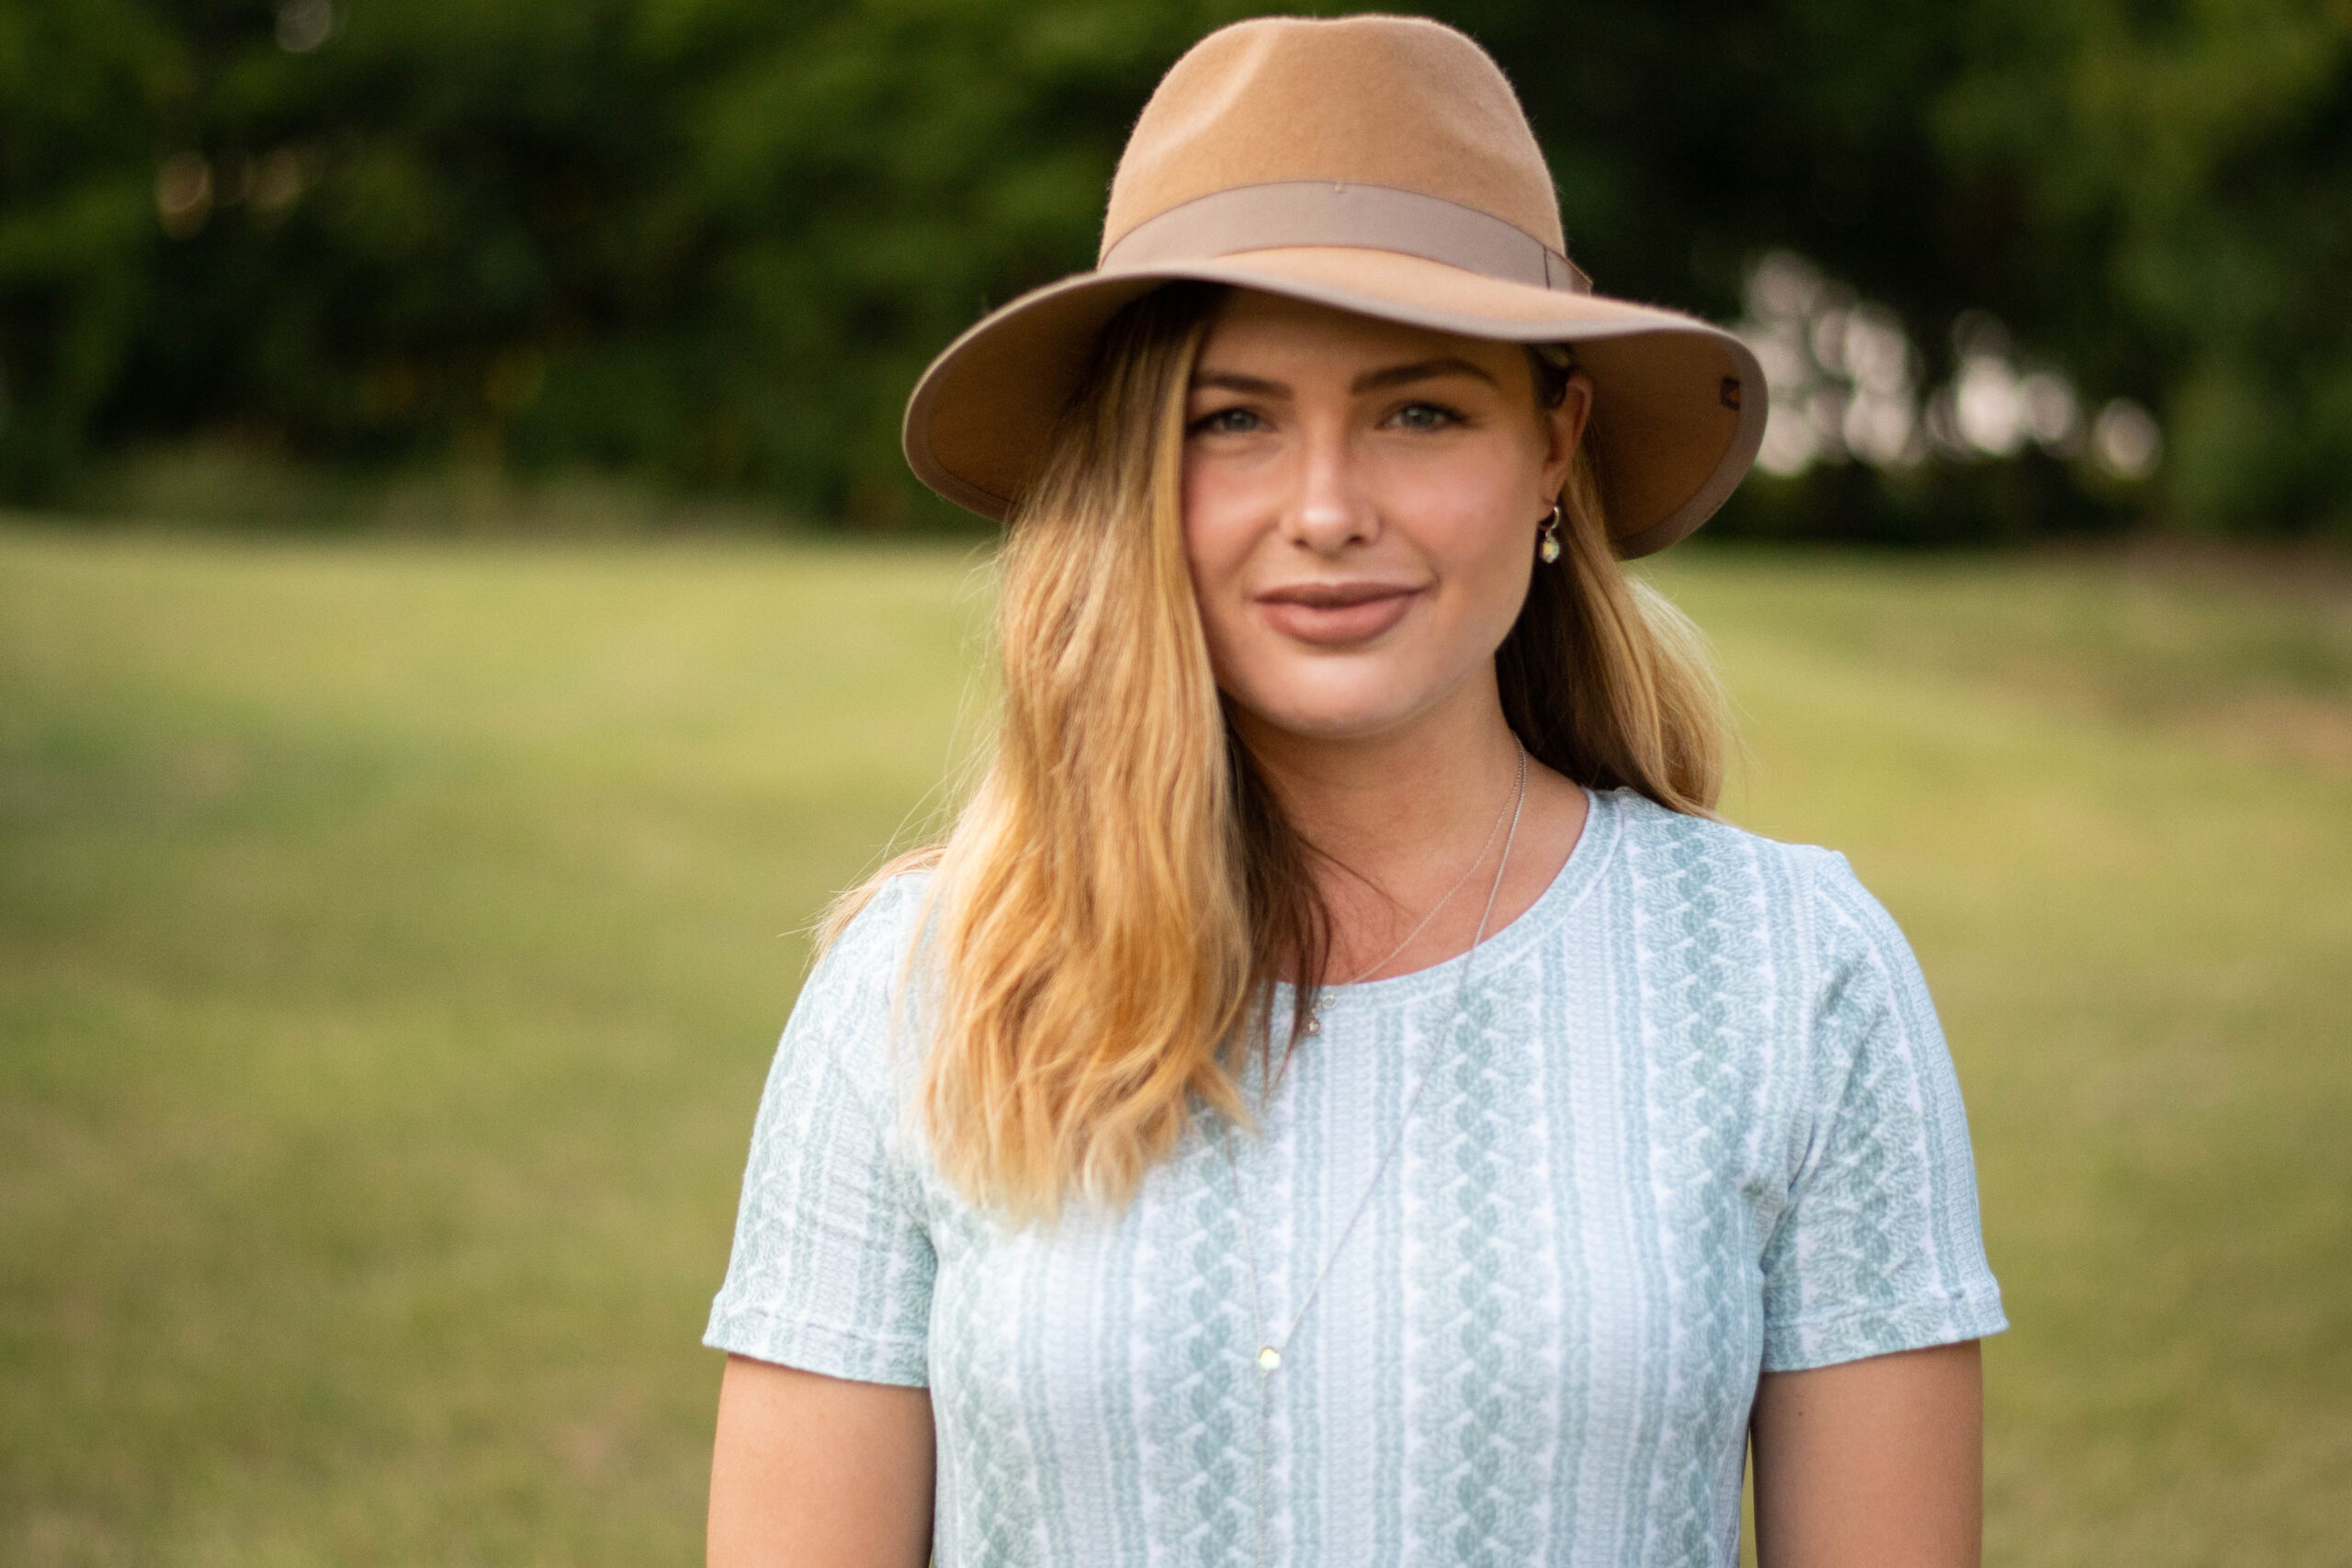 Elizabeth stands in front of a field of grass, wearing a camel colored hat and a t-shirt dress made out of a cable knit sweater look french terry fabric in a sage cream and cream color scheme